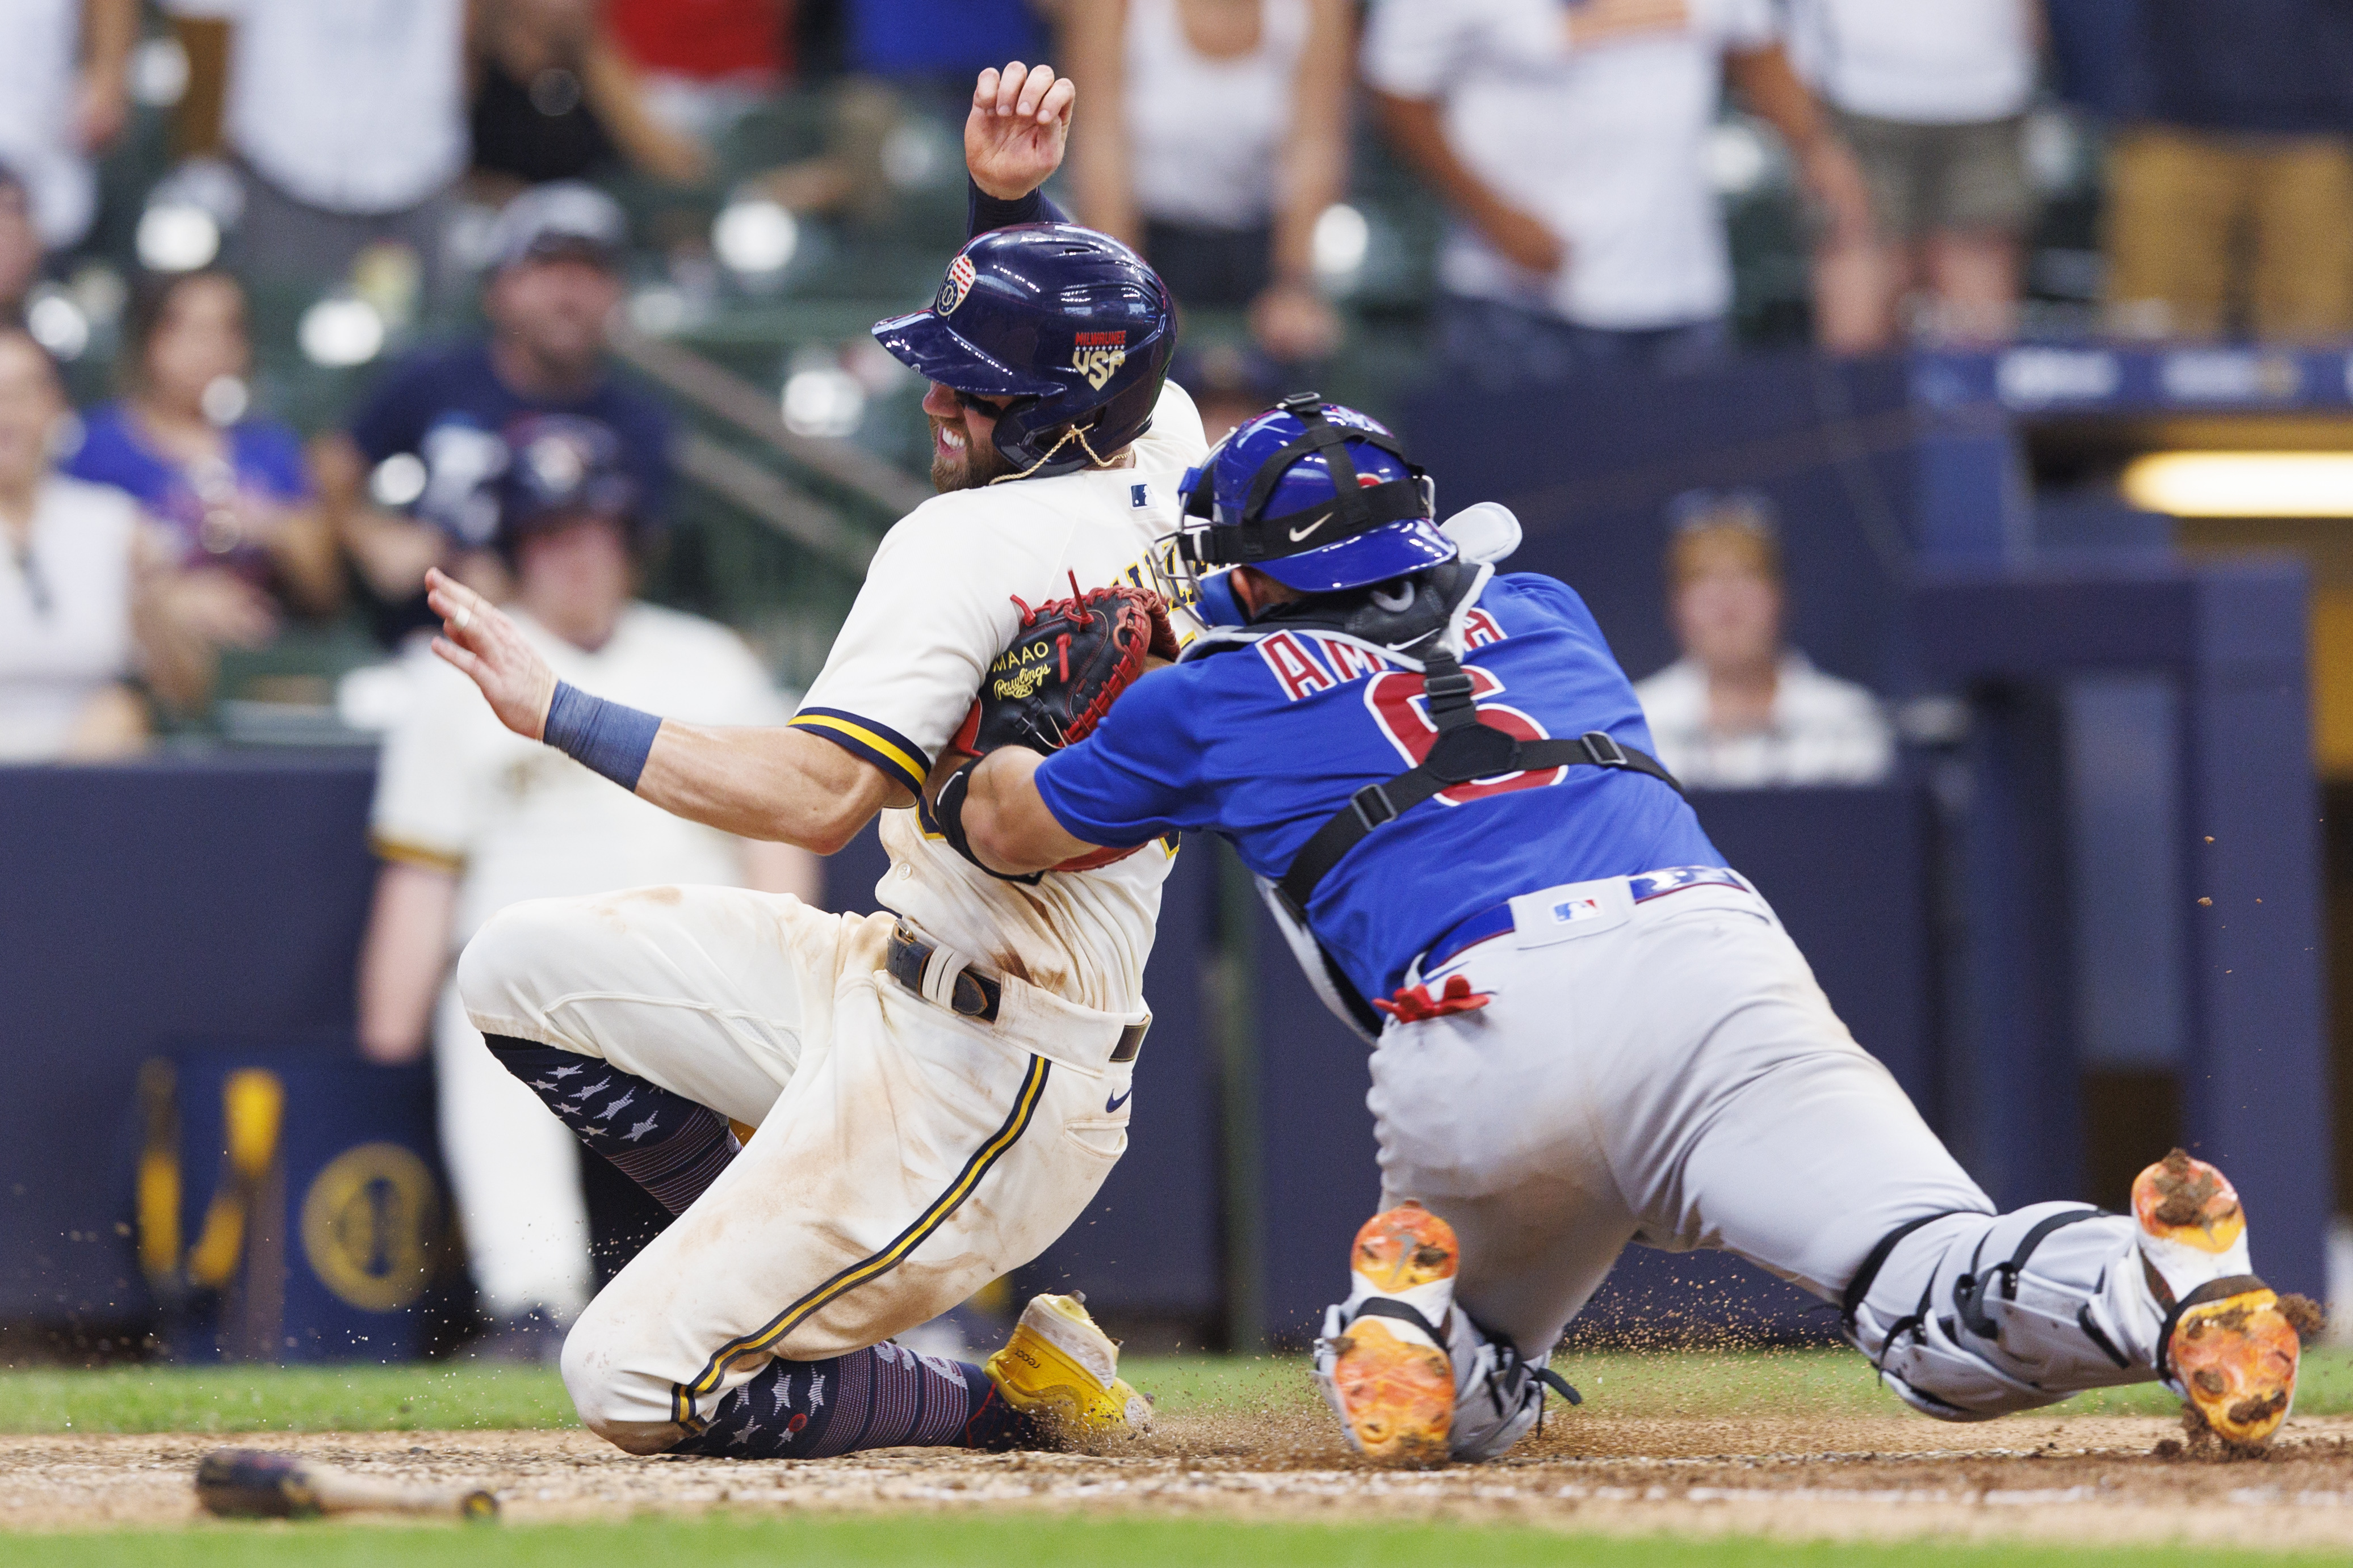 Brewers edged by Cubs  News, Sports, Jobs - Daily Press